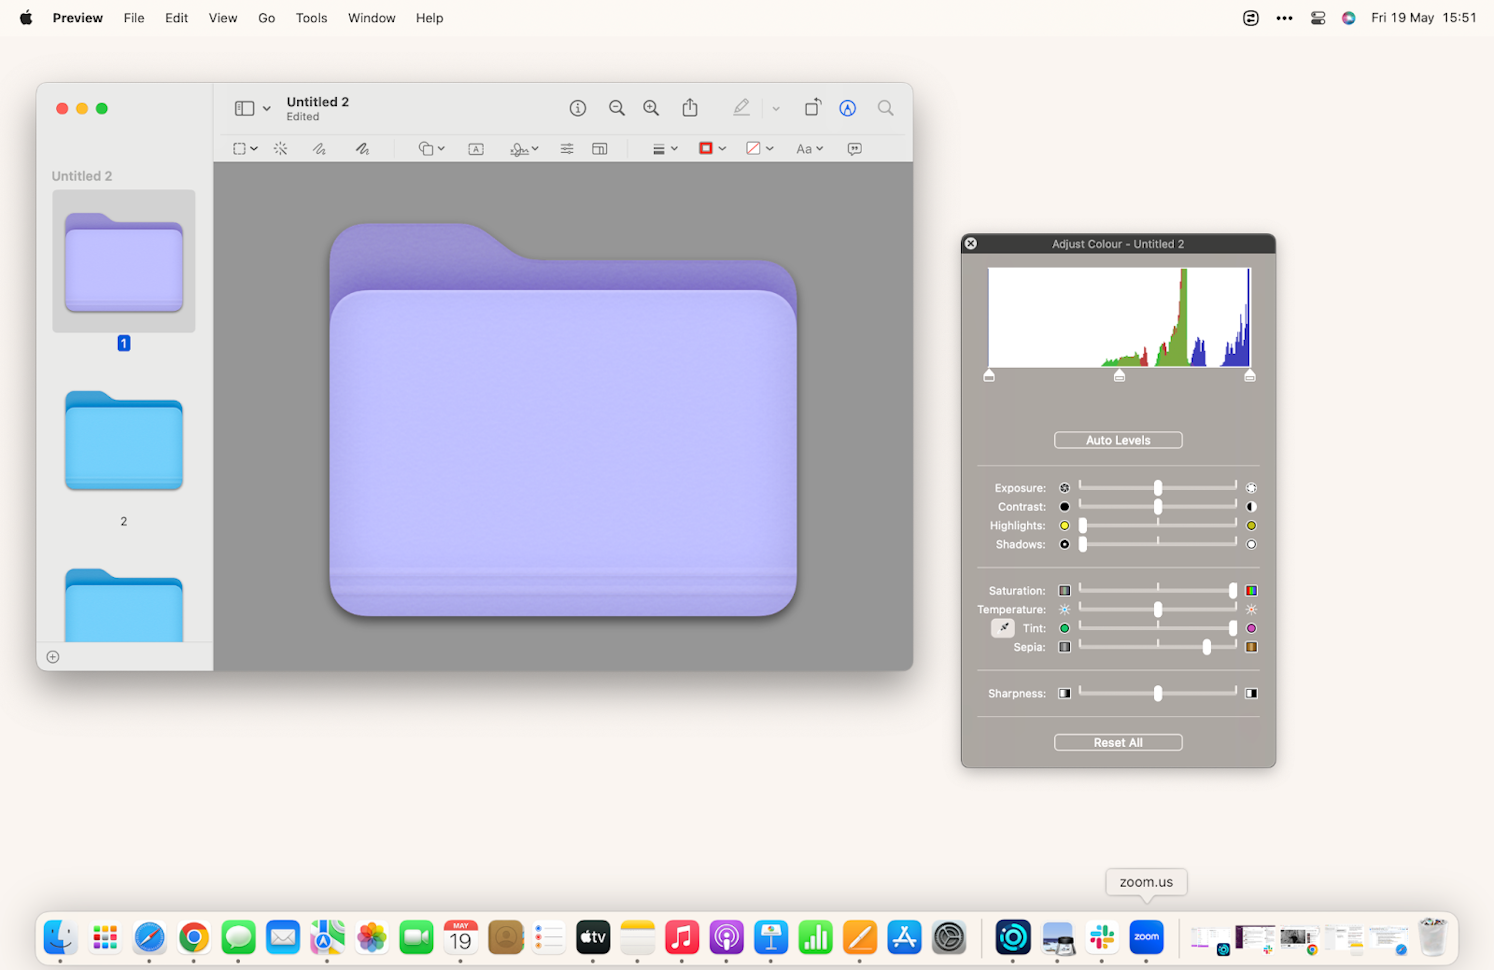 Here’s how to change folder color on Mac